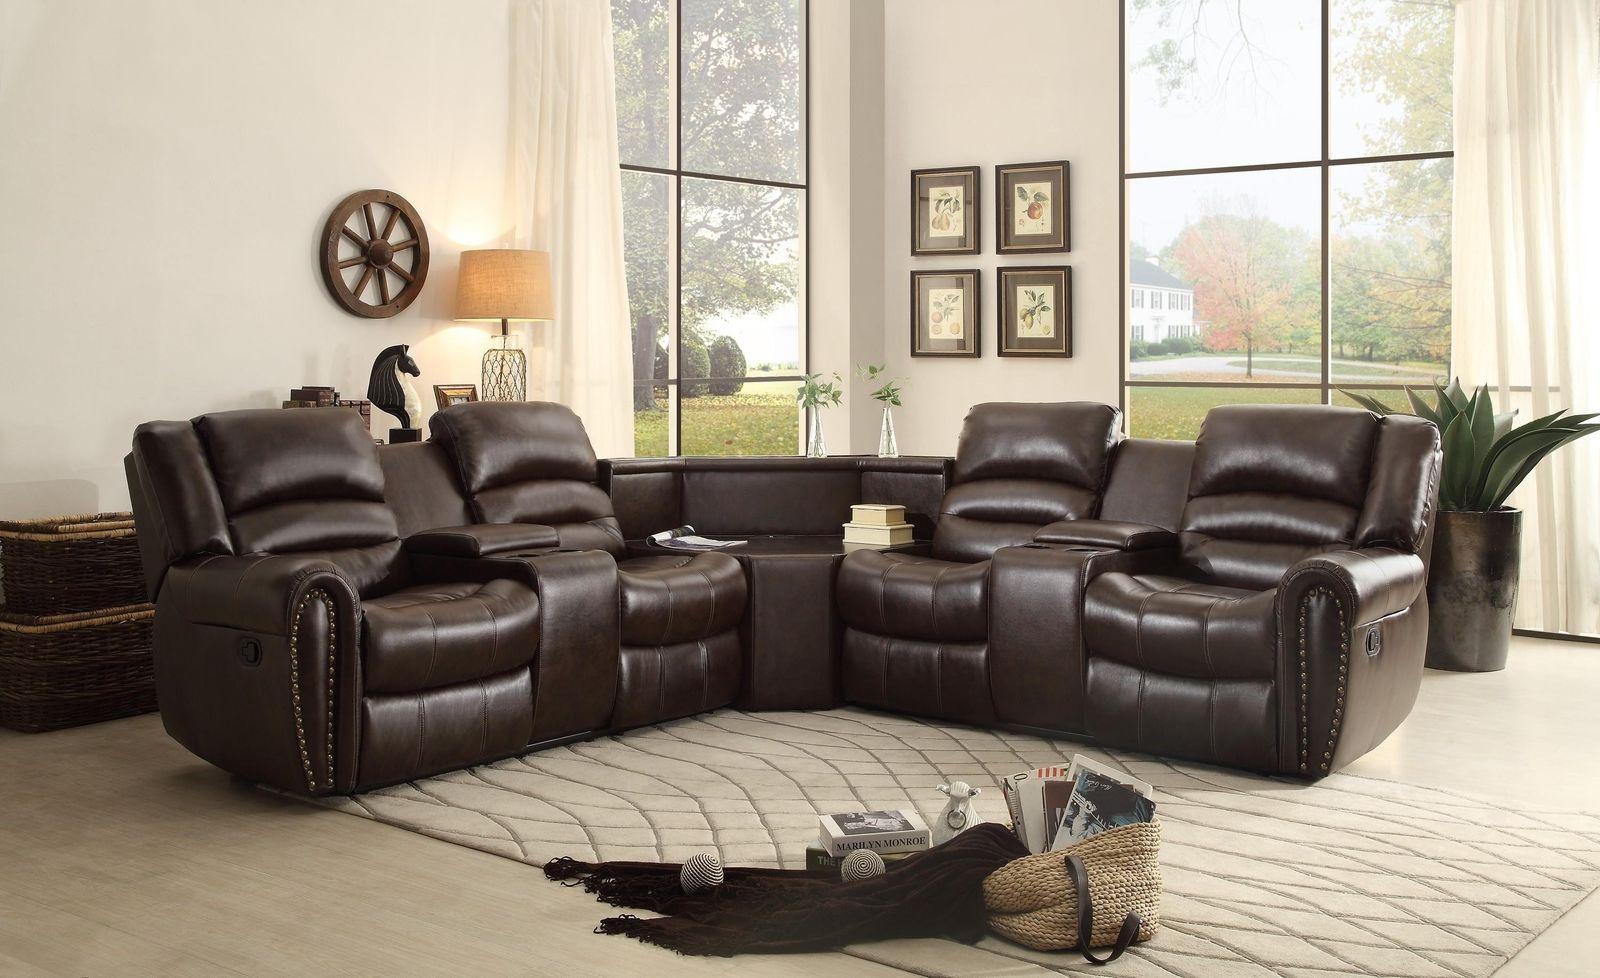 Contemporary, Modern Reclining Sectional Palmyra 8411-2LCN-Set in Brown Bonded Leather